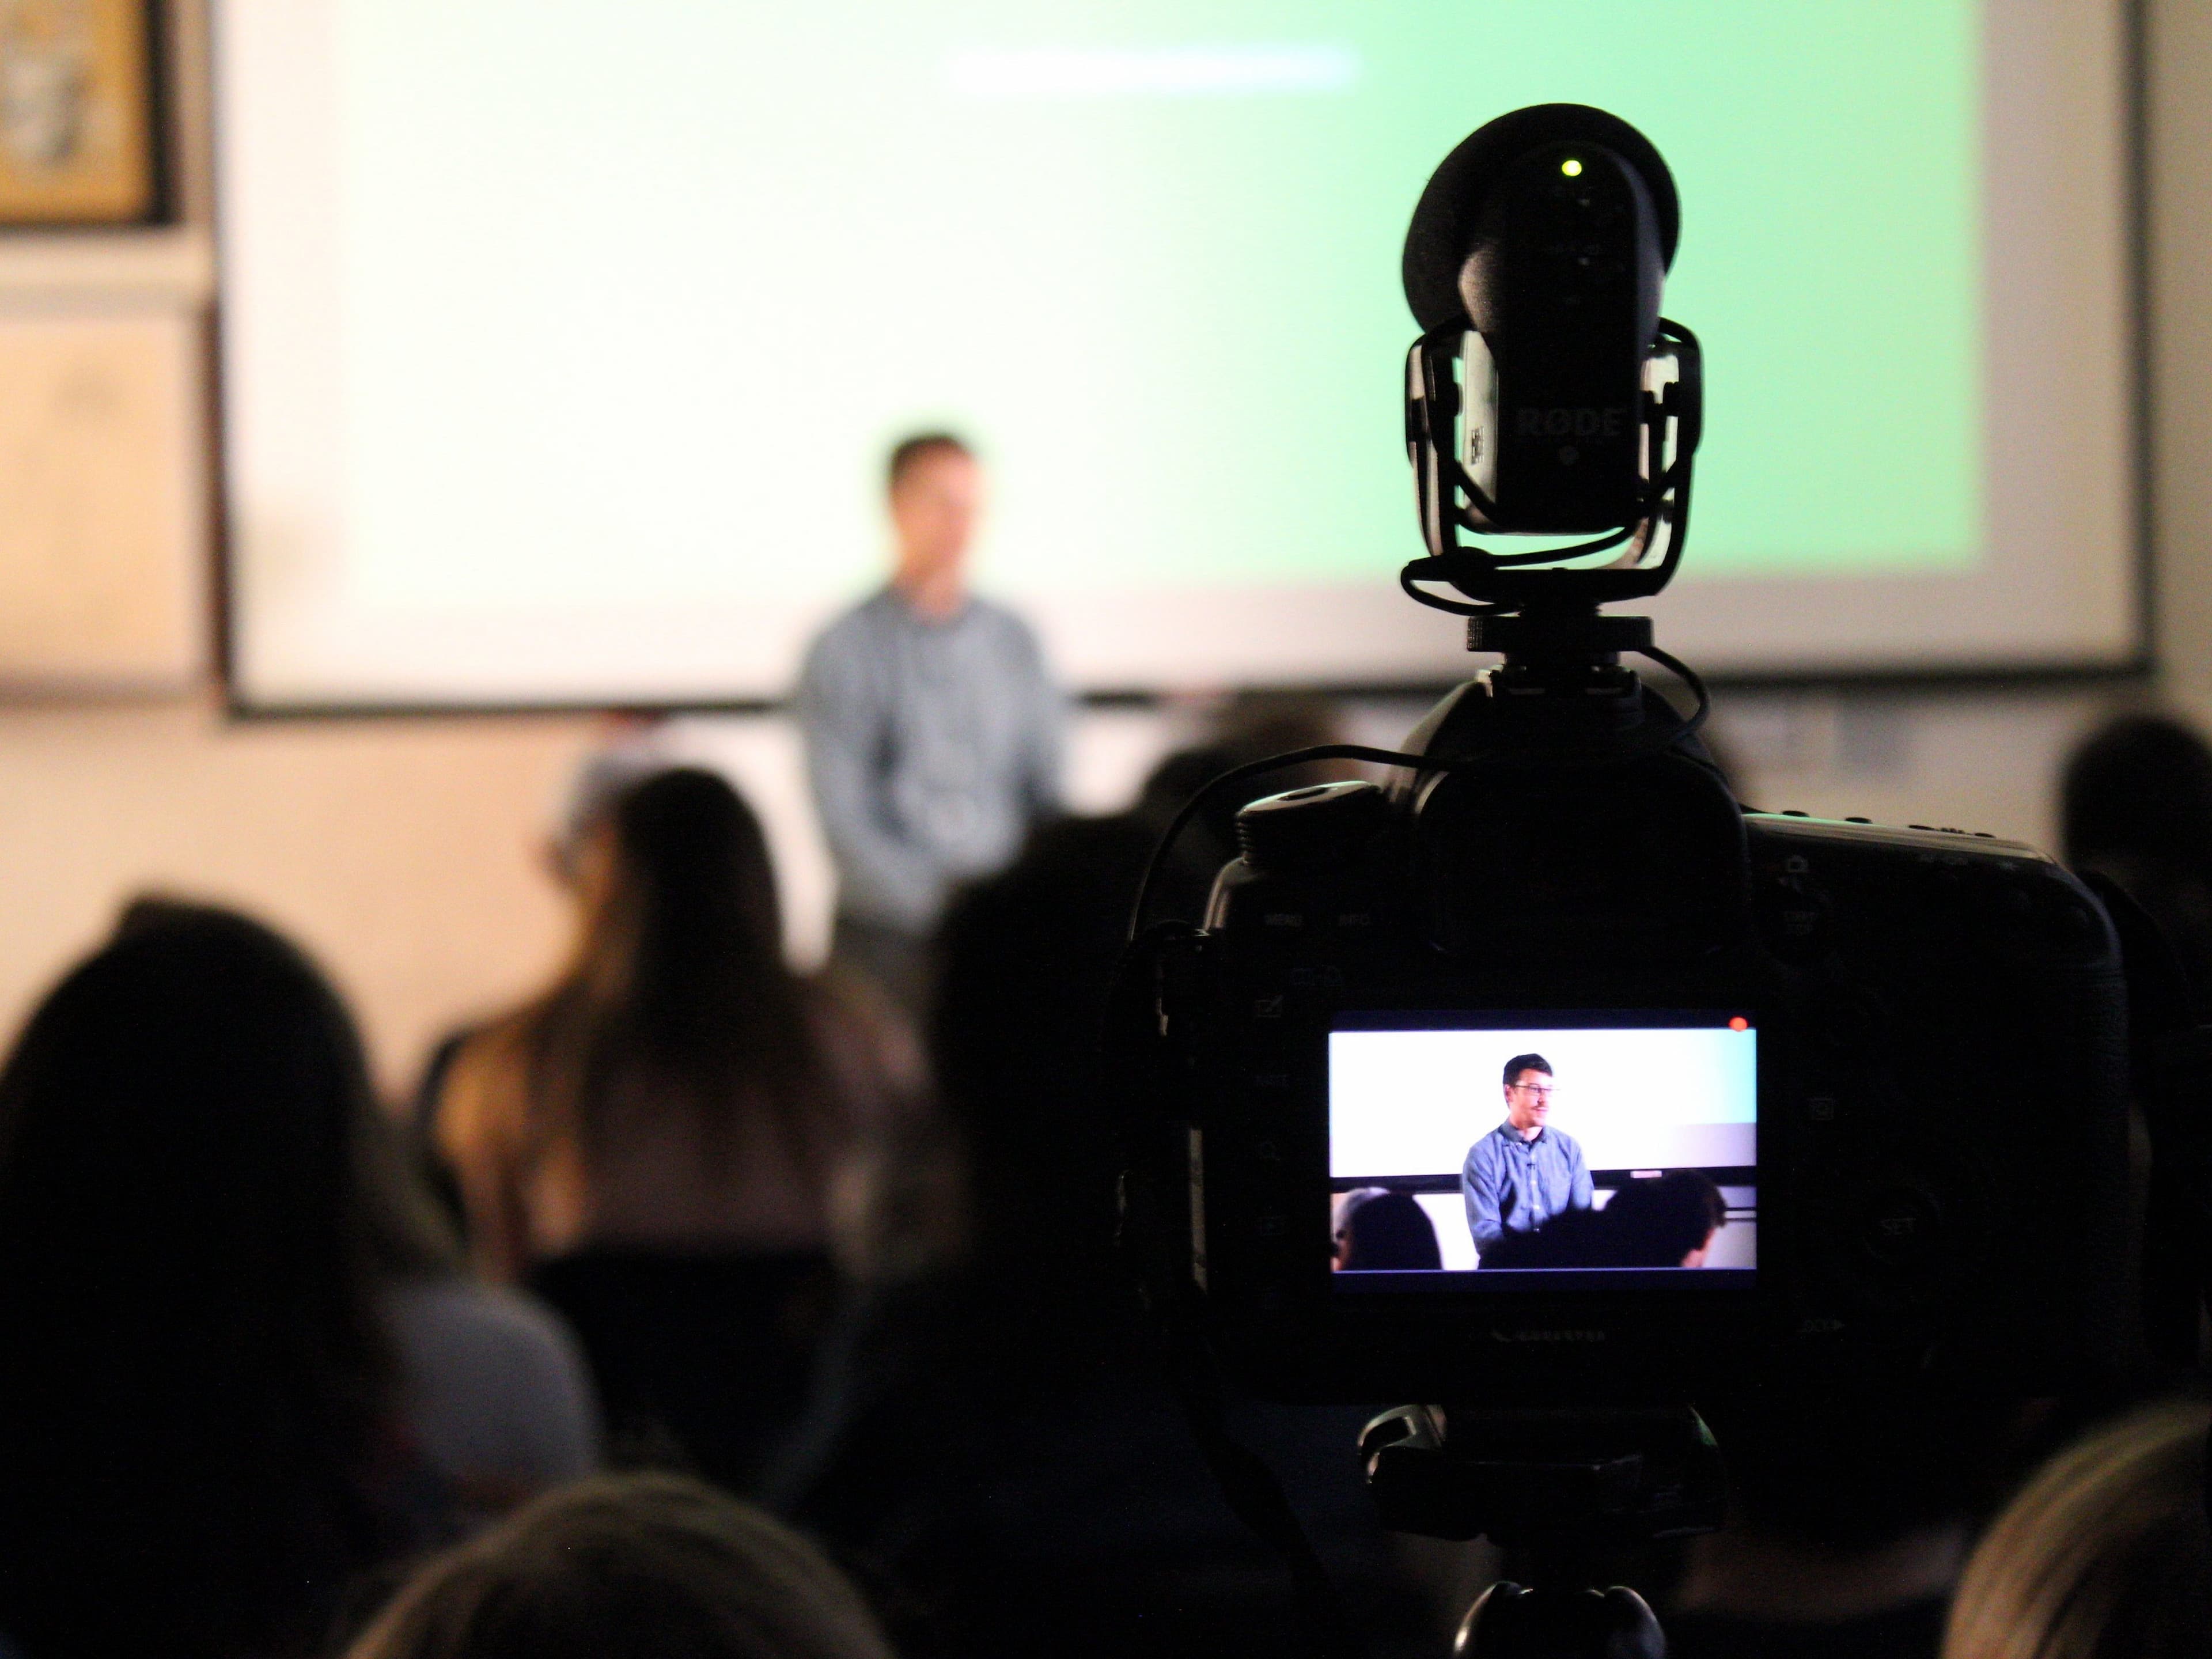 A speaker is presenting in front of an audience, seen out of focus in the background. A camera in the foreground is recording the event, with the speaker clearly visible on the camera’s display screen. The room appears to be dimly lit.